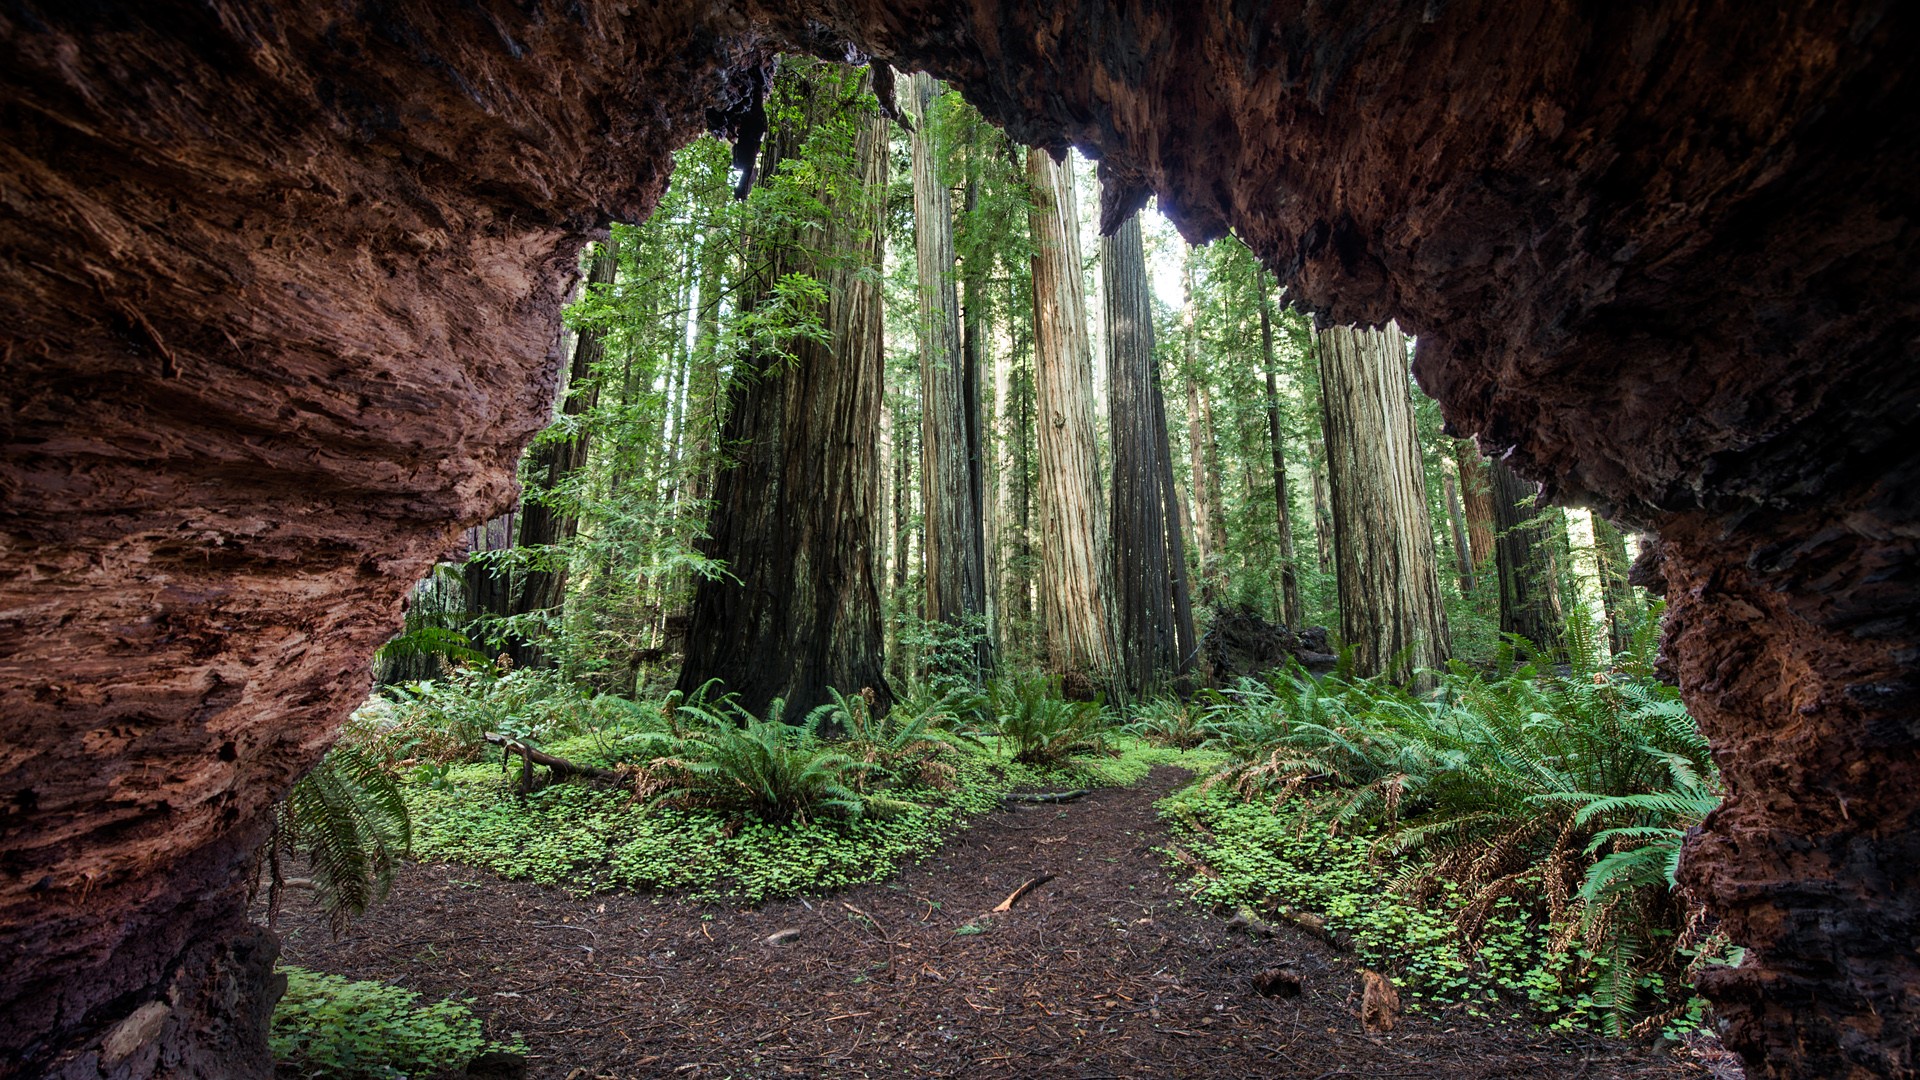 General 1920x1080 nature rocks cave forest plants trees redwood California USA